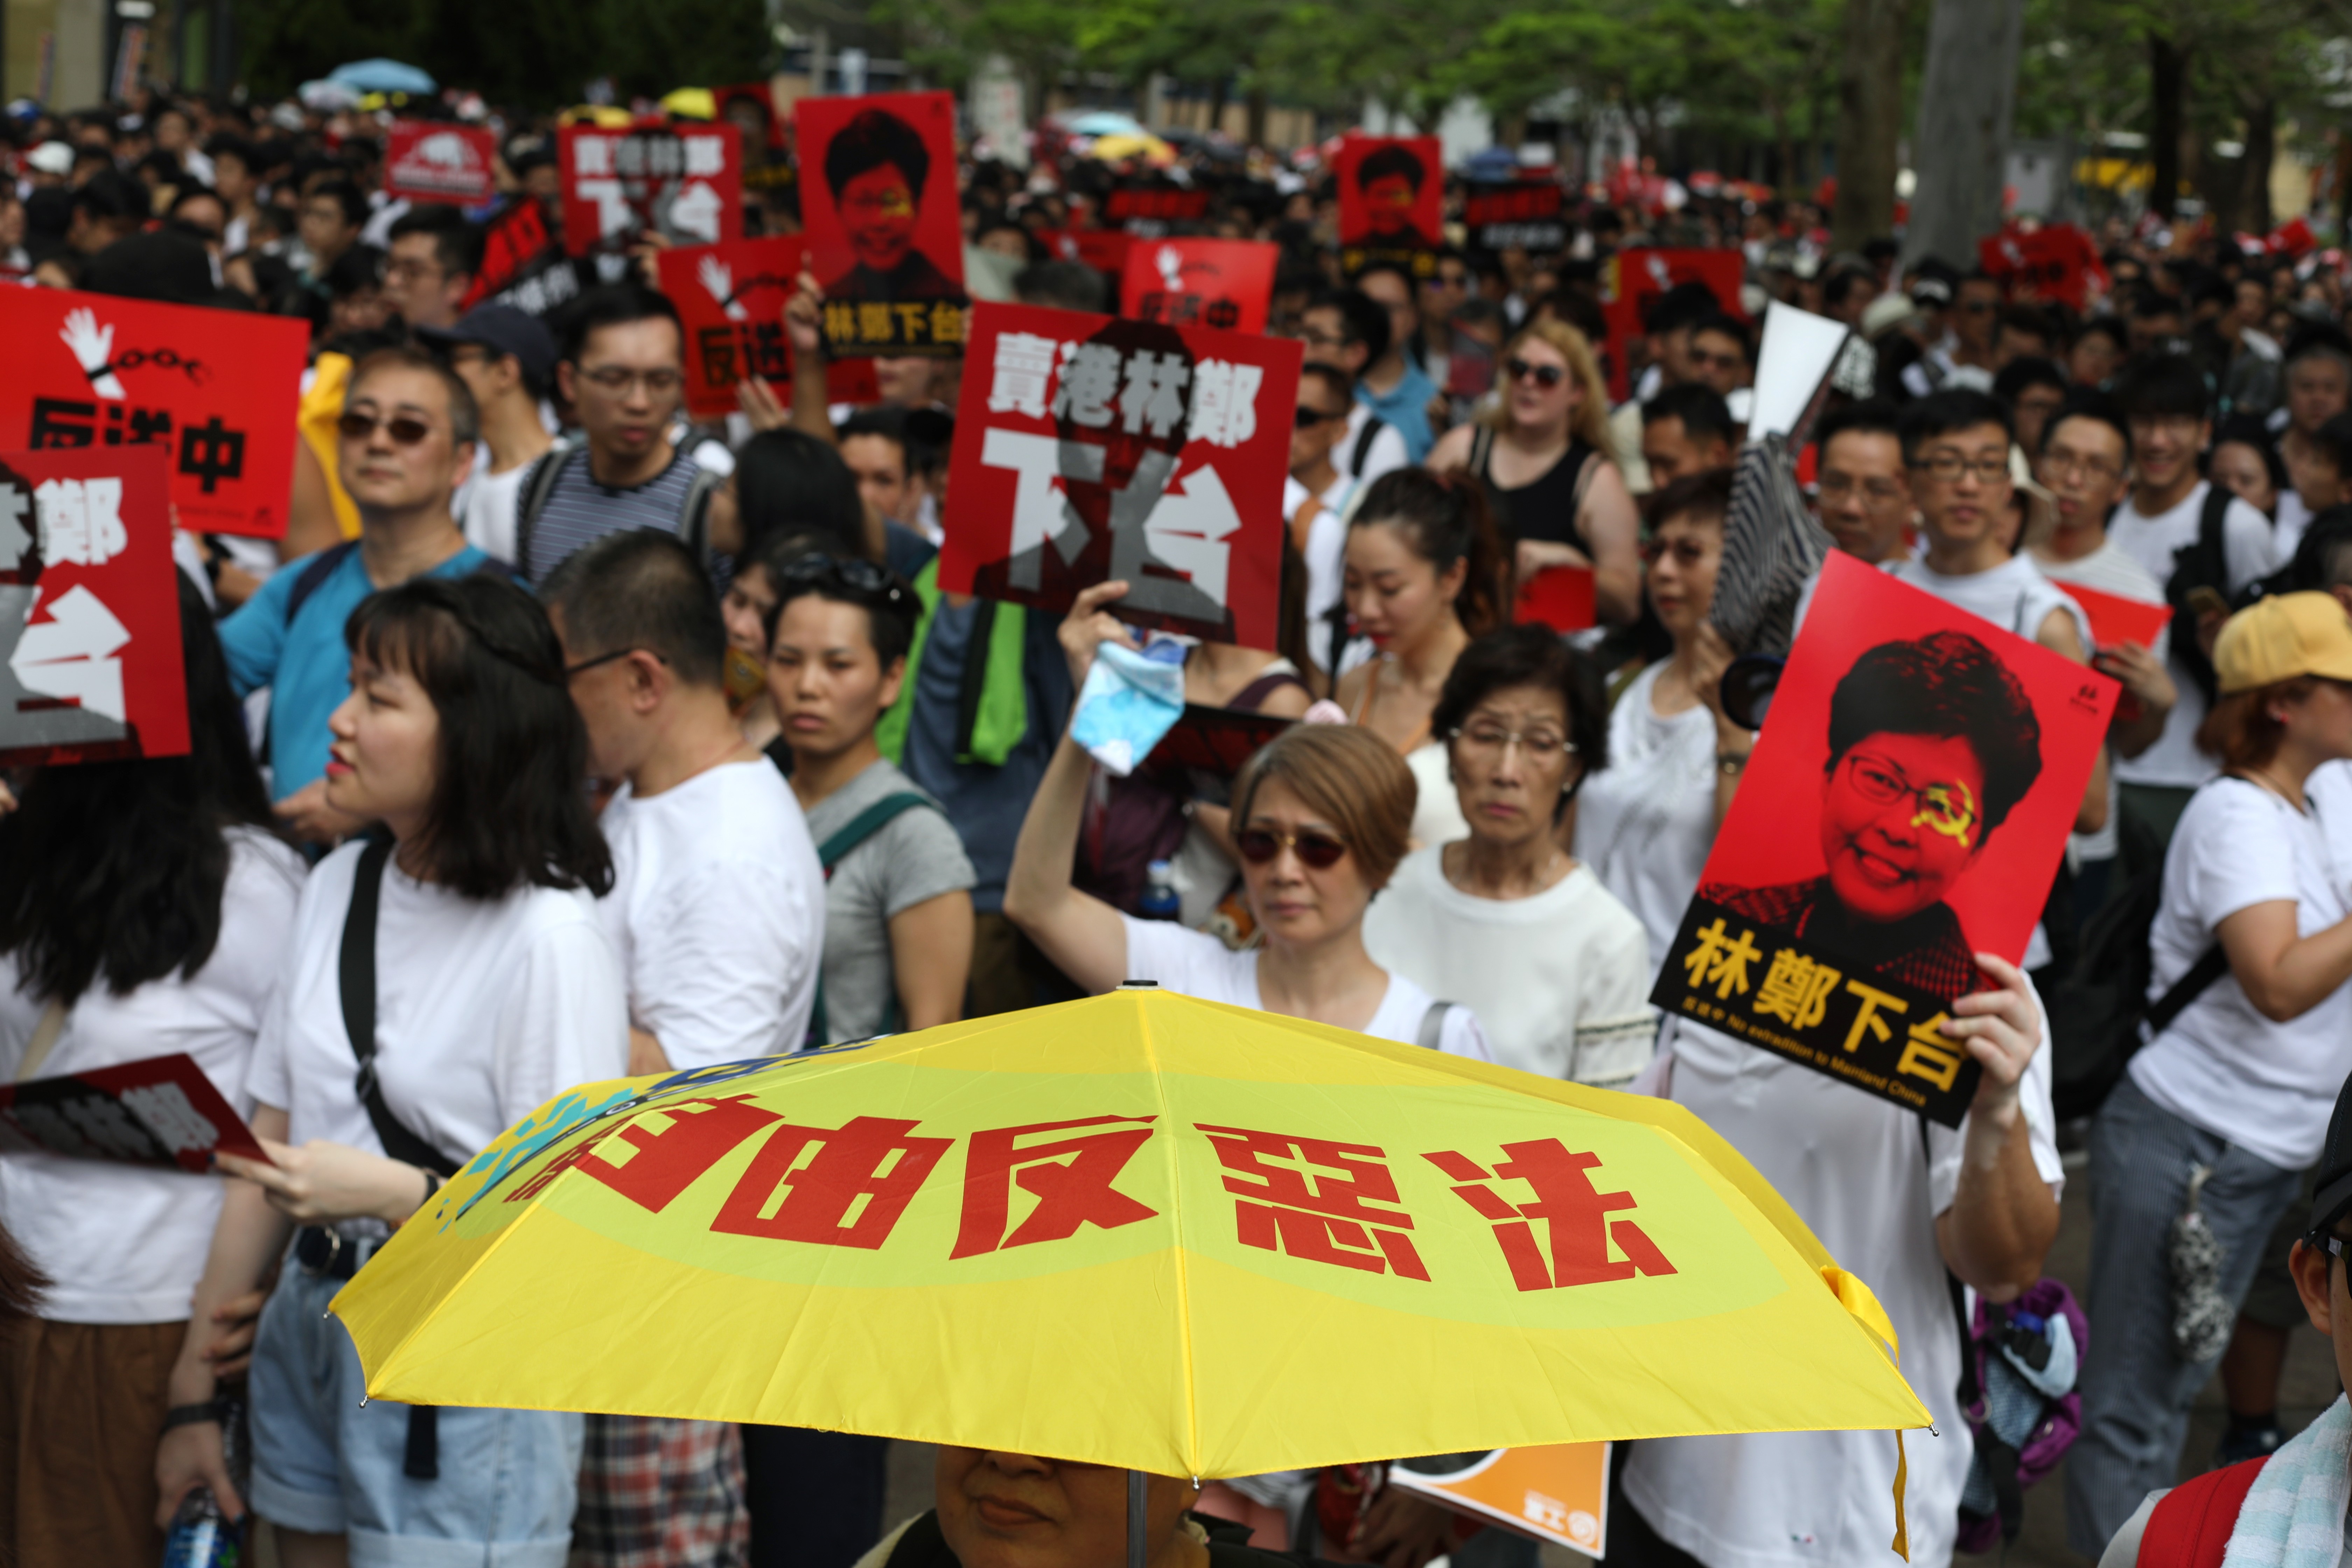 Hongkongers march from Causeway Bay to the government headquarters in Admiralty on June 9, in protest against the proposal to amend the city’s extradition laws to allow the transfer of fugitives to mainland China. The message on the yellow umbrella calls on the people to oppose the “evil law”. Photo: Xiaomei Chen